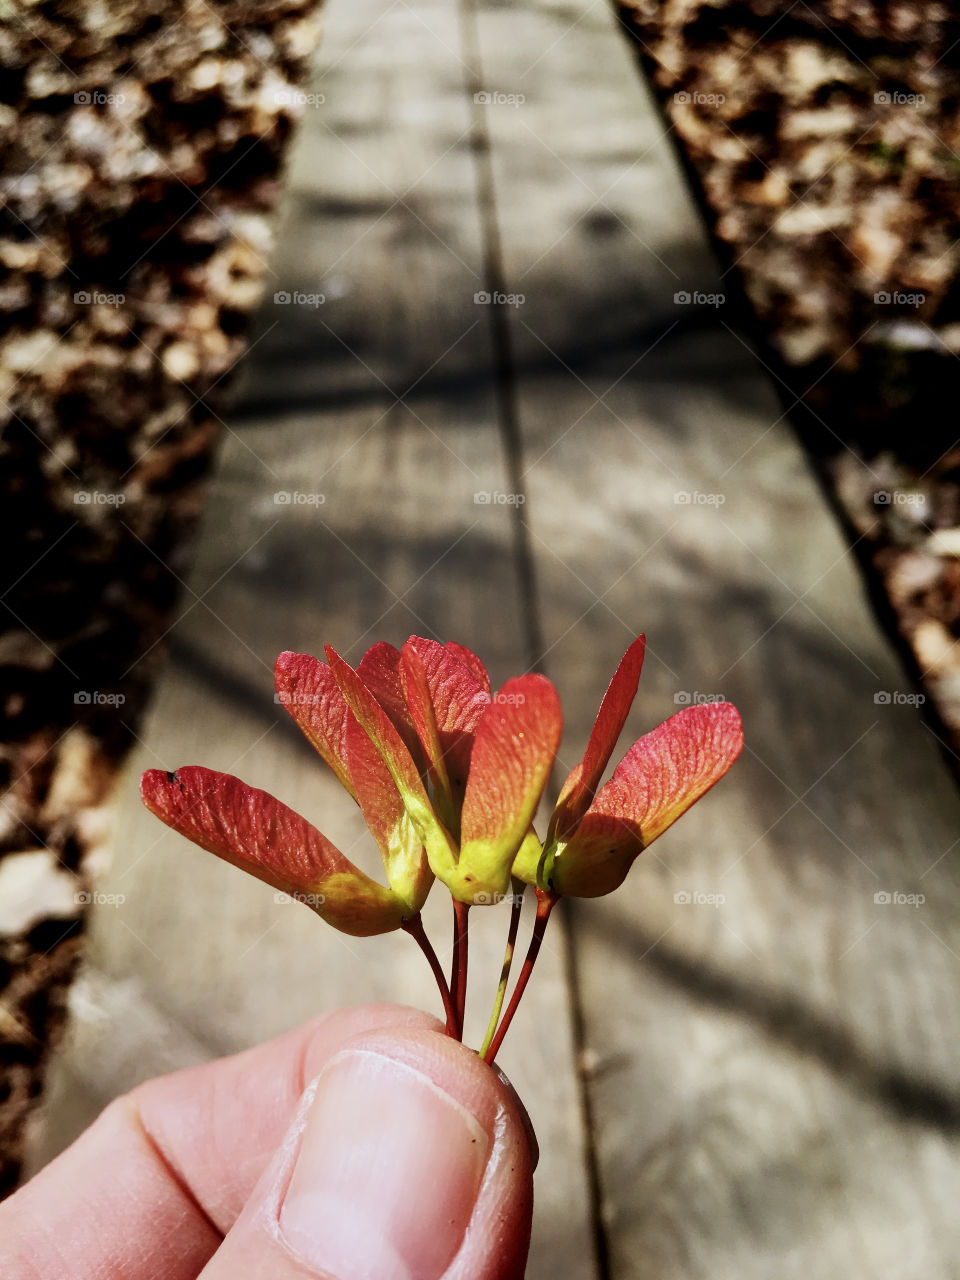 Bright red samaras or seed pods from the red maple trees signify early spring in North Carolina. 